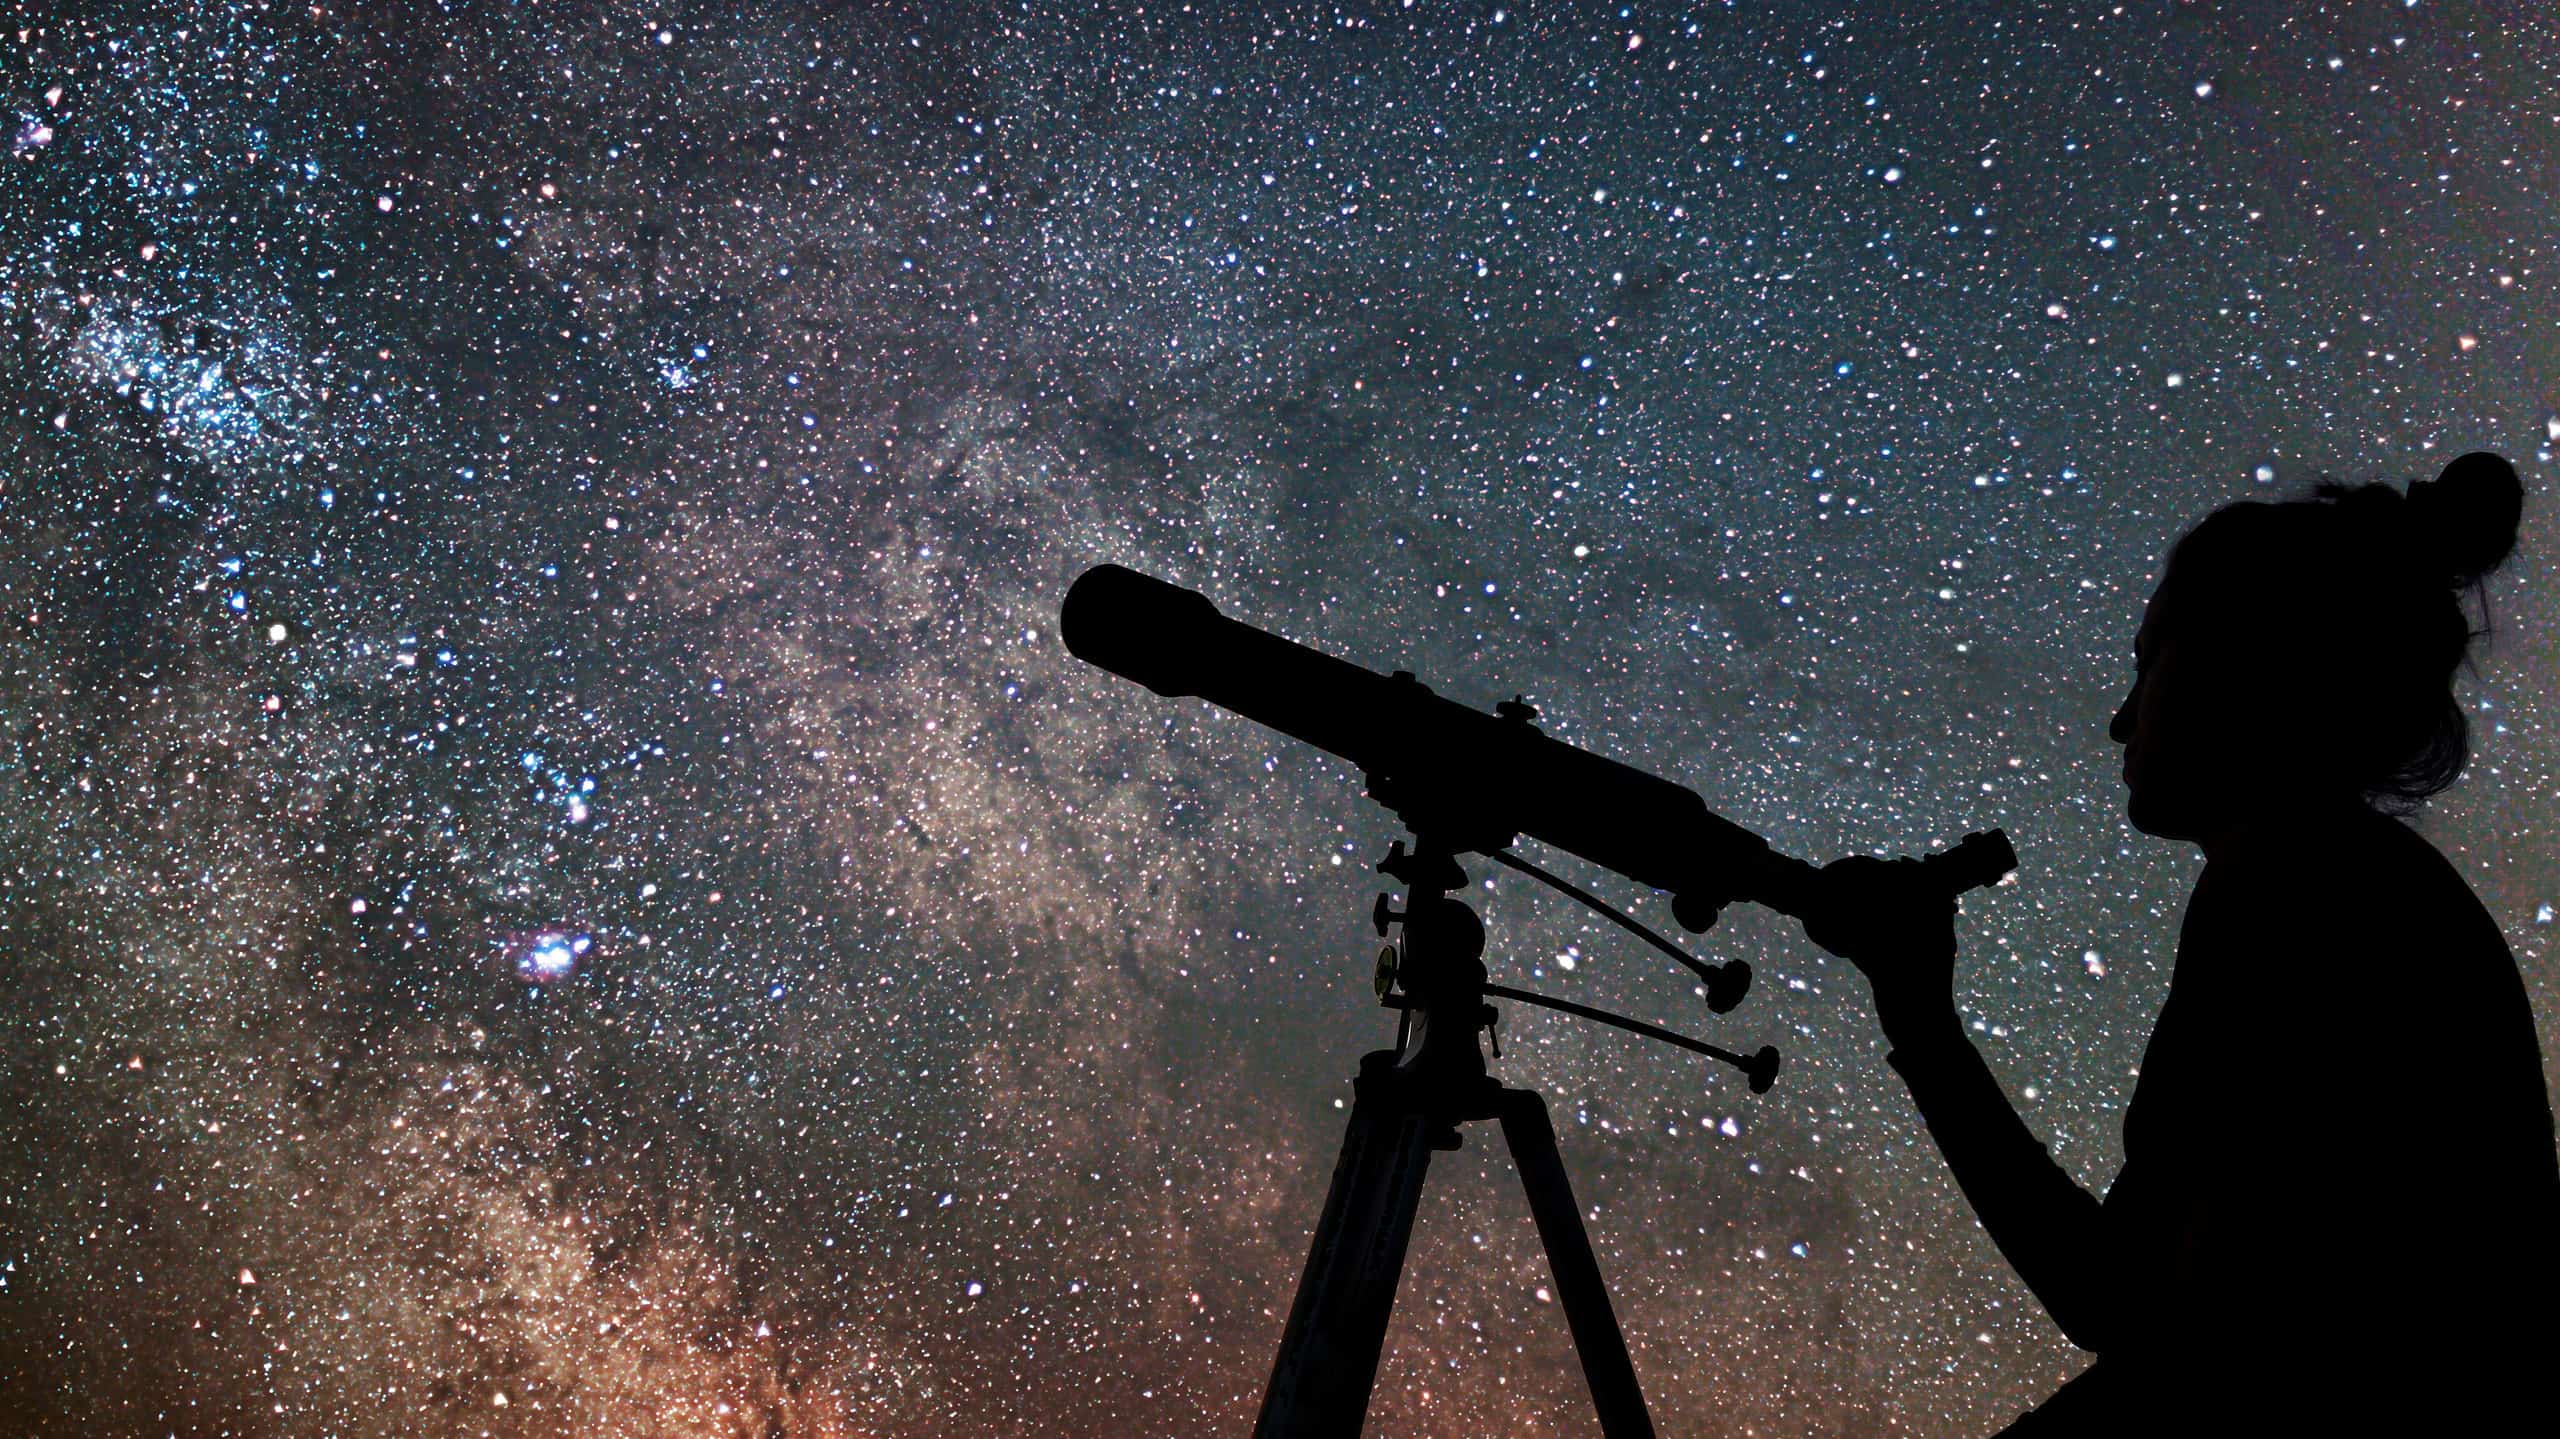 Photo lower right frame silhouette of a person with their hair in a top knot. The person’s right hand is clutching a telescope also silhouette, against a star filled sky